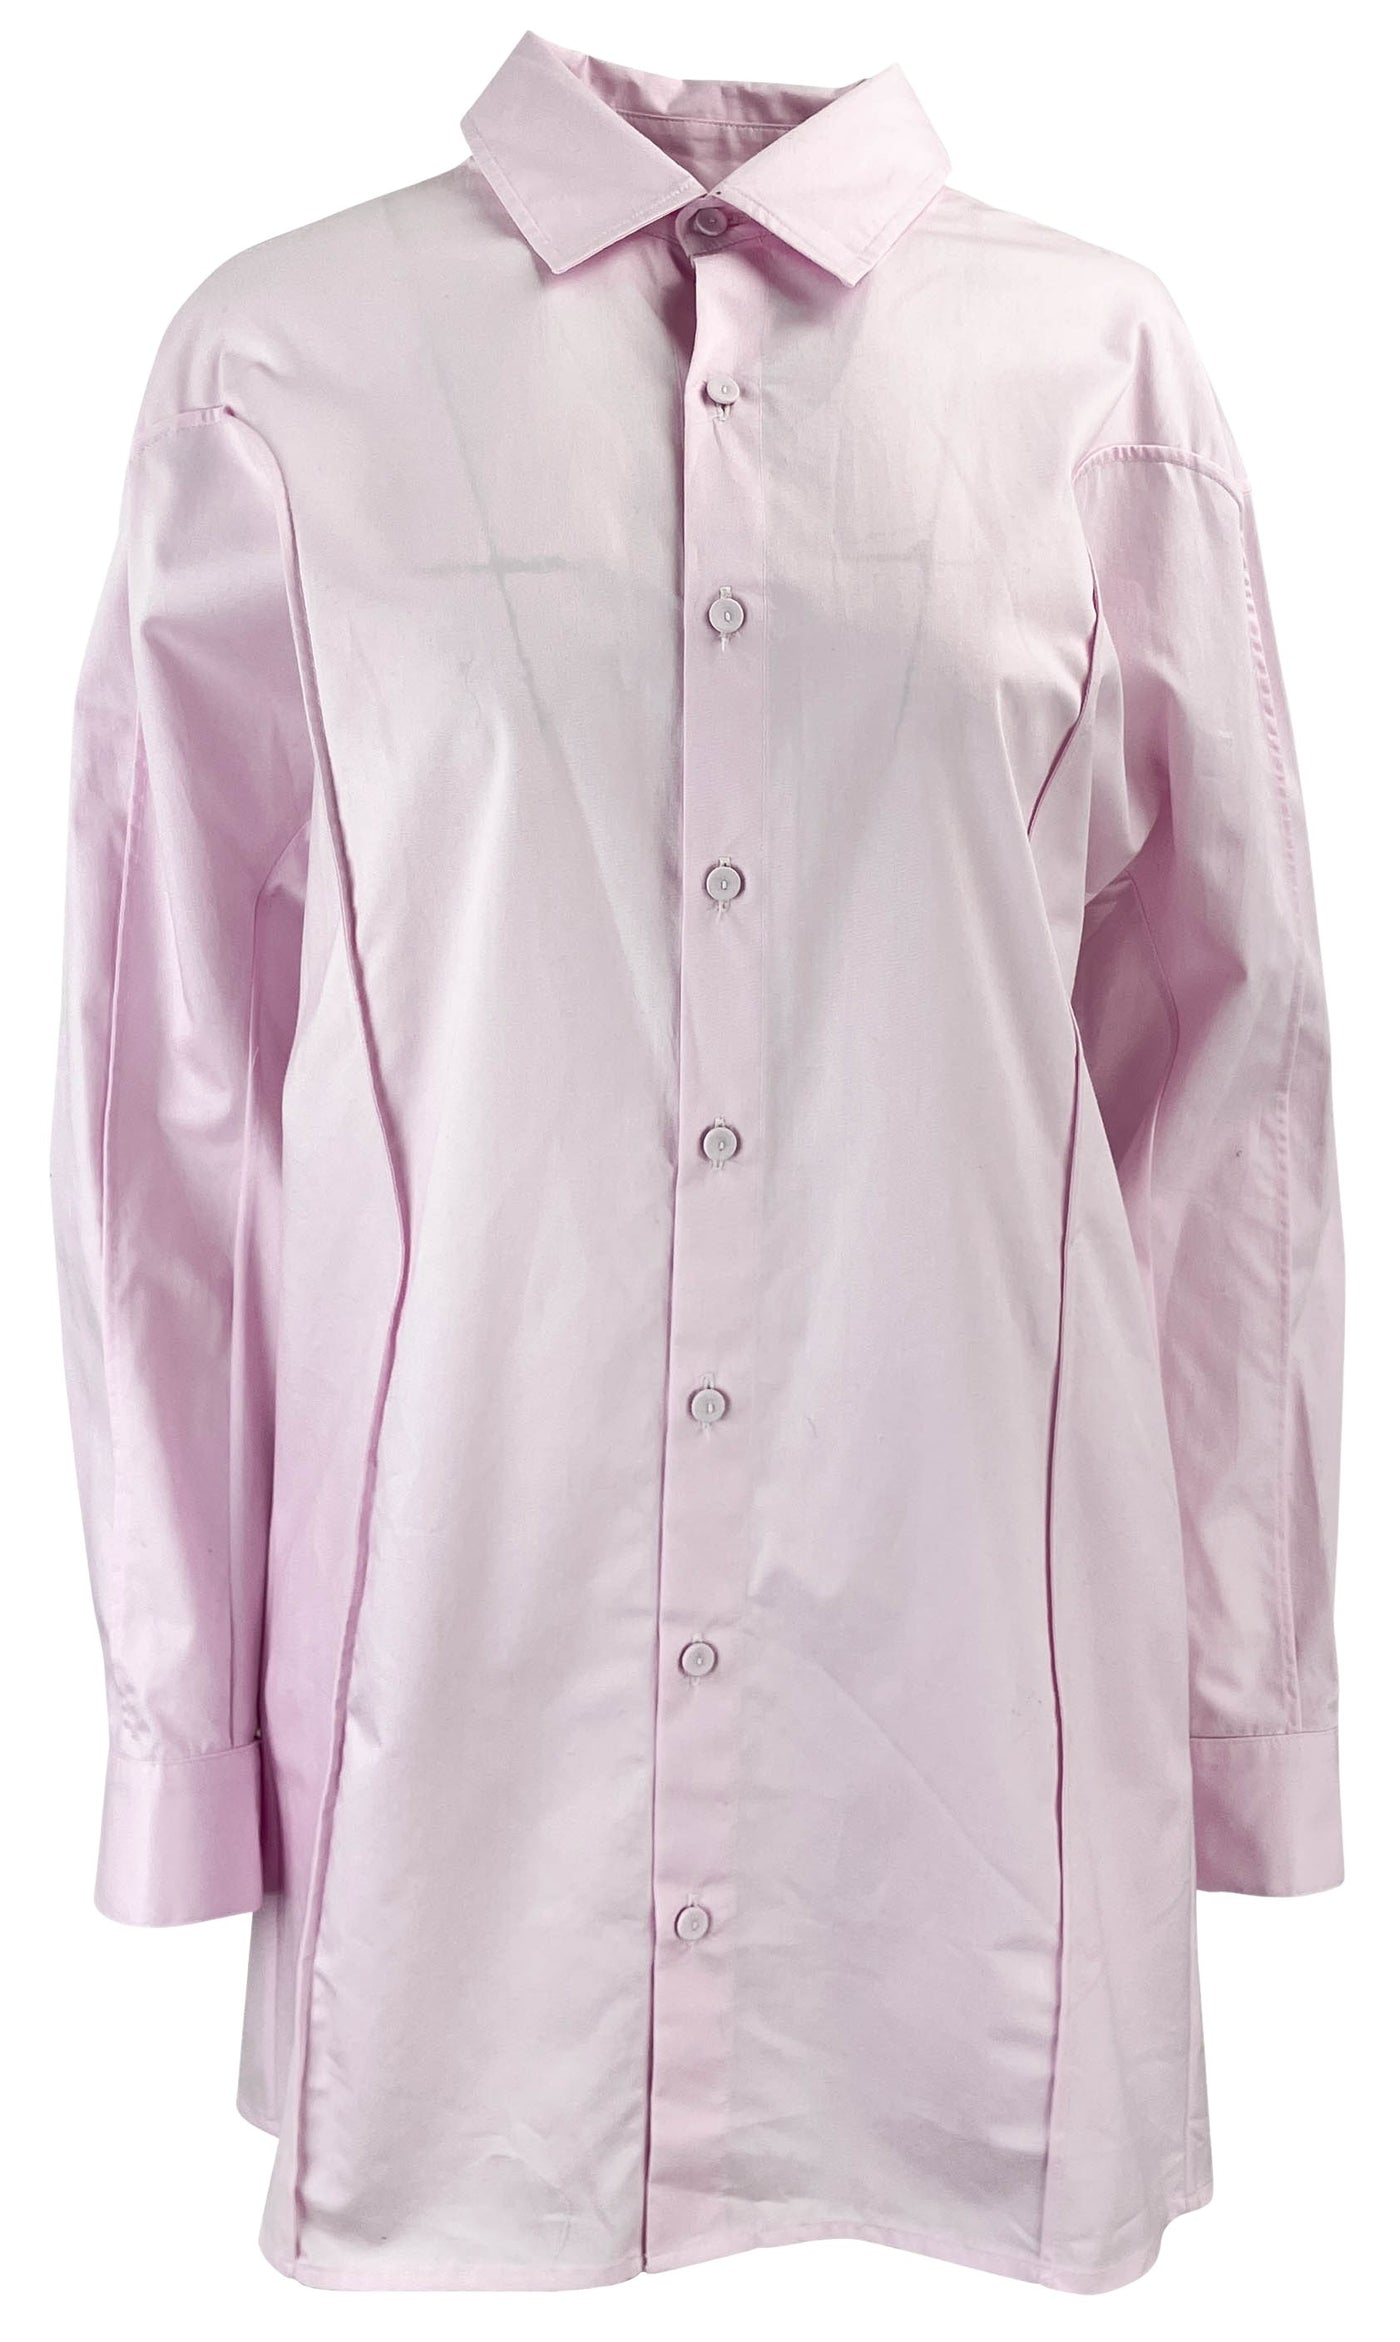 Aknvas Shirtdress Tunic in Light Pink - Discounts on Aknvas at UAL